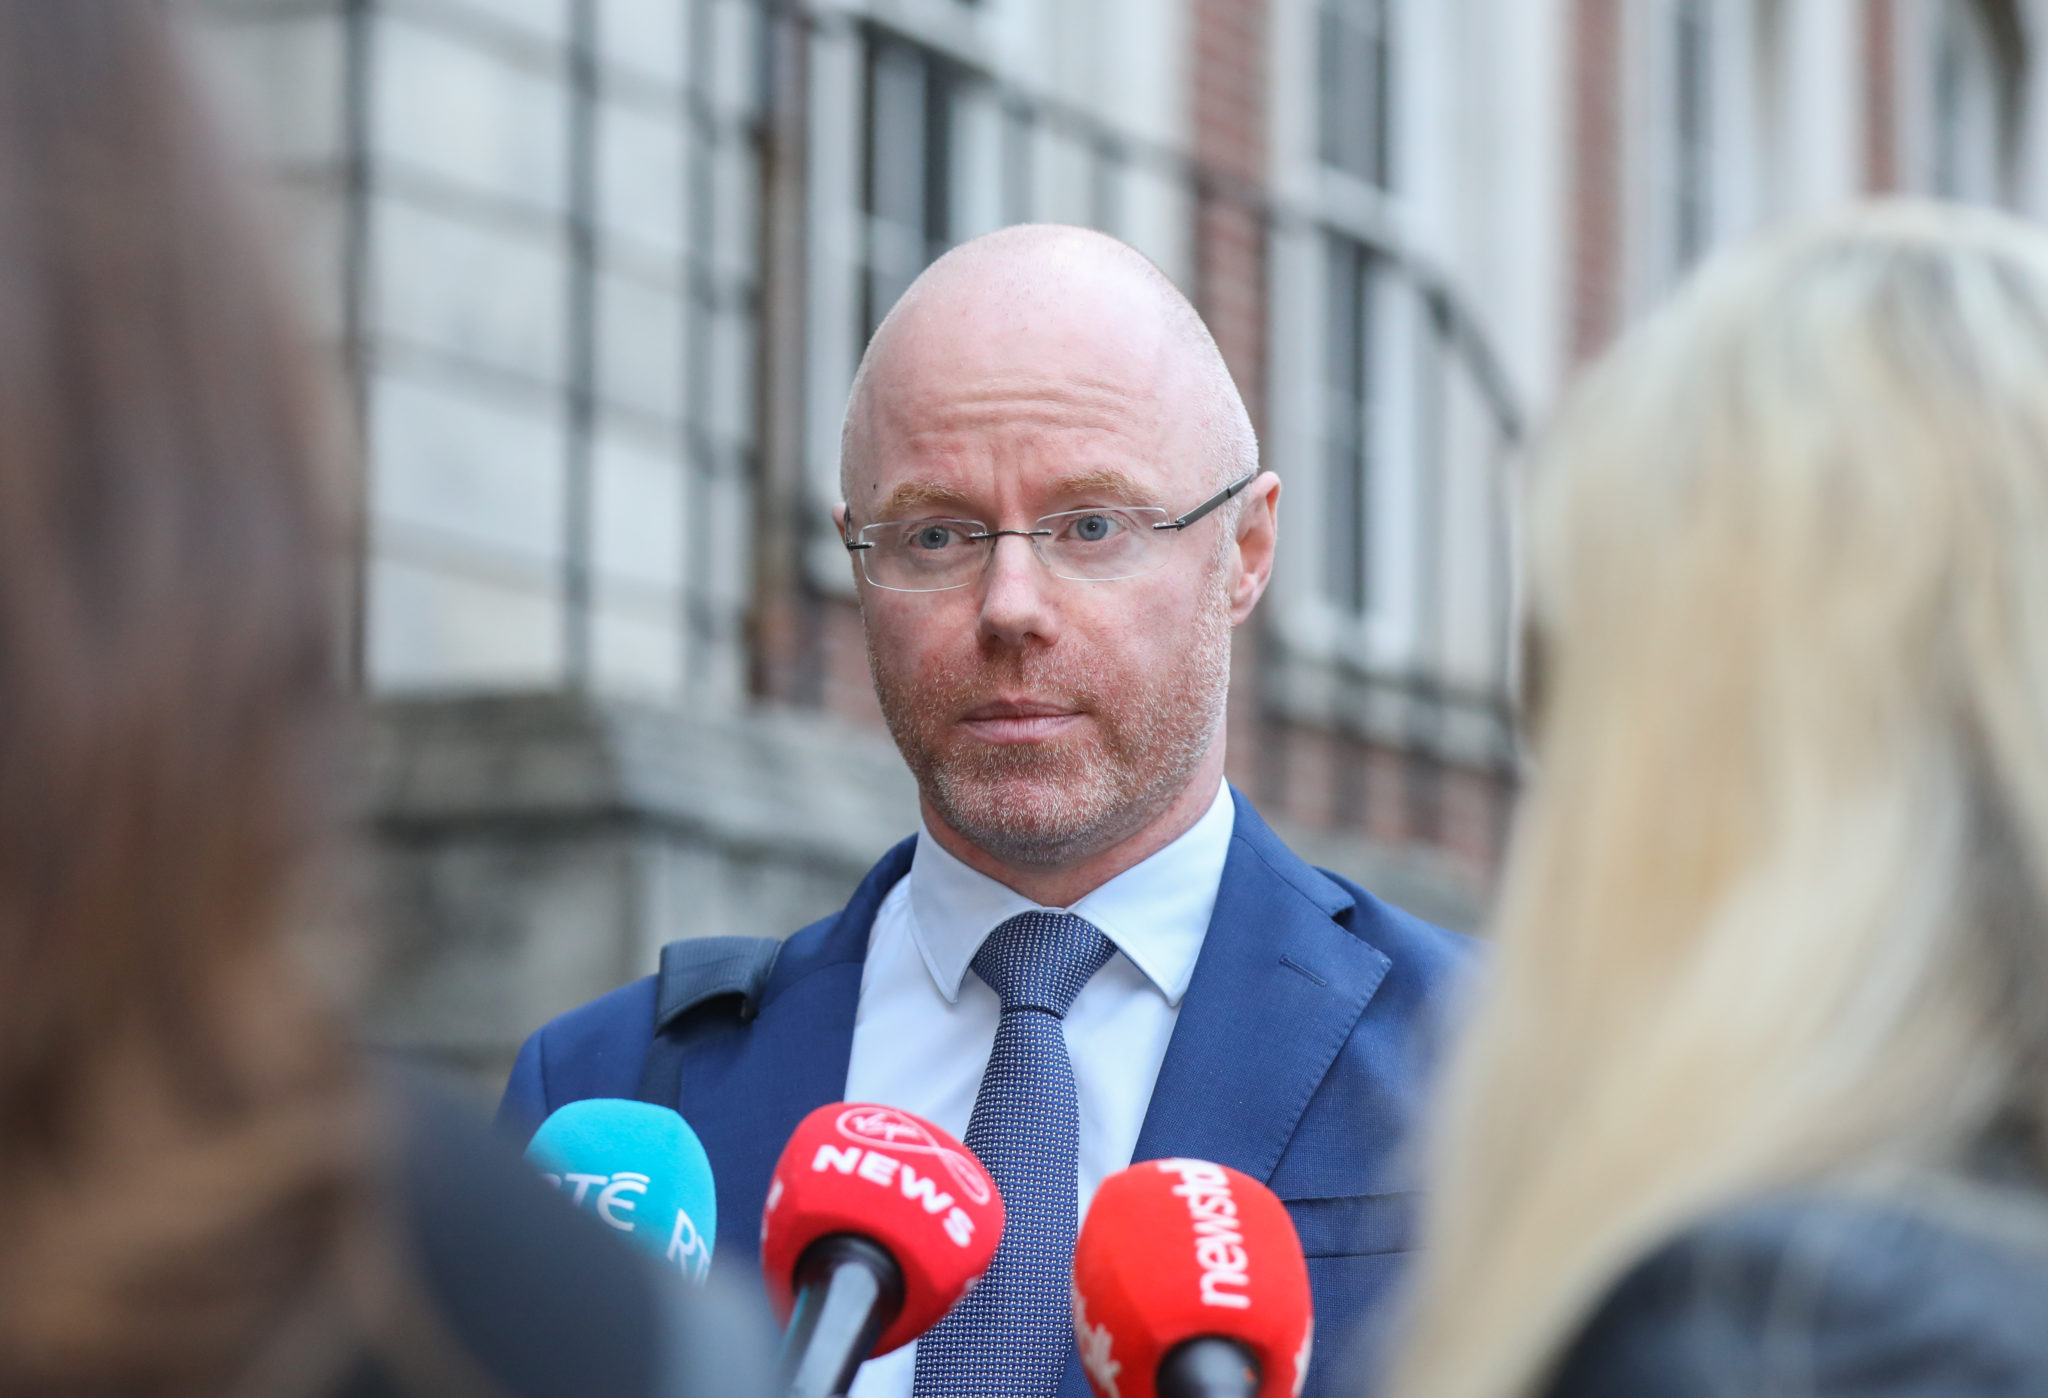 Minister for Health Stephen Donnelly outside Dublin Castle before this morning's Cabinet meeting, 19-10-2021. Image: Leah Farrell/RollingNews